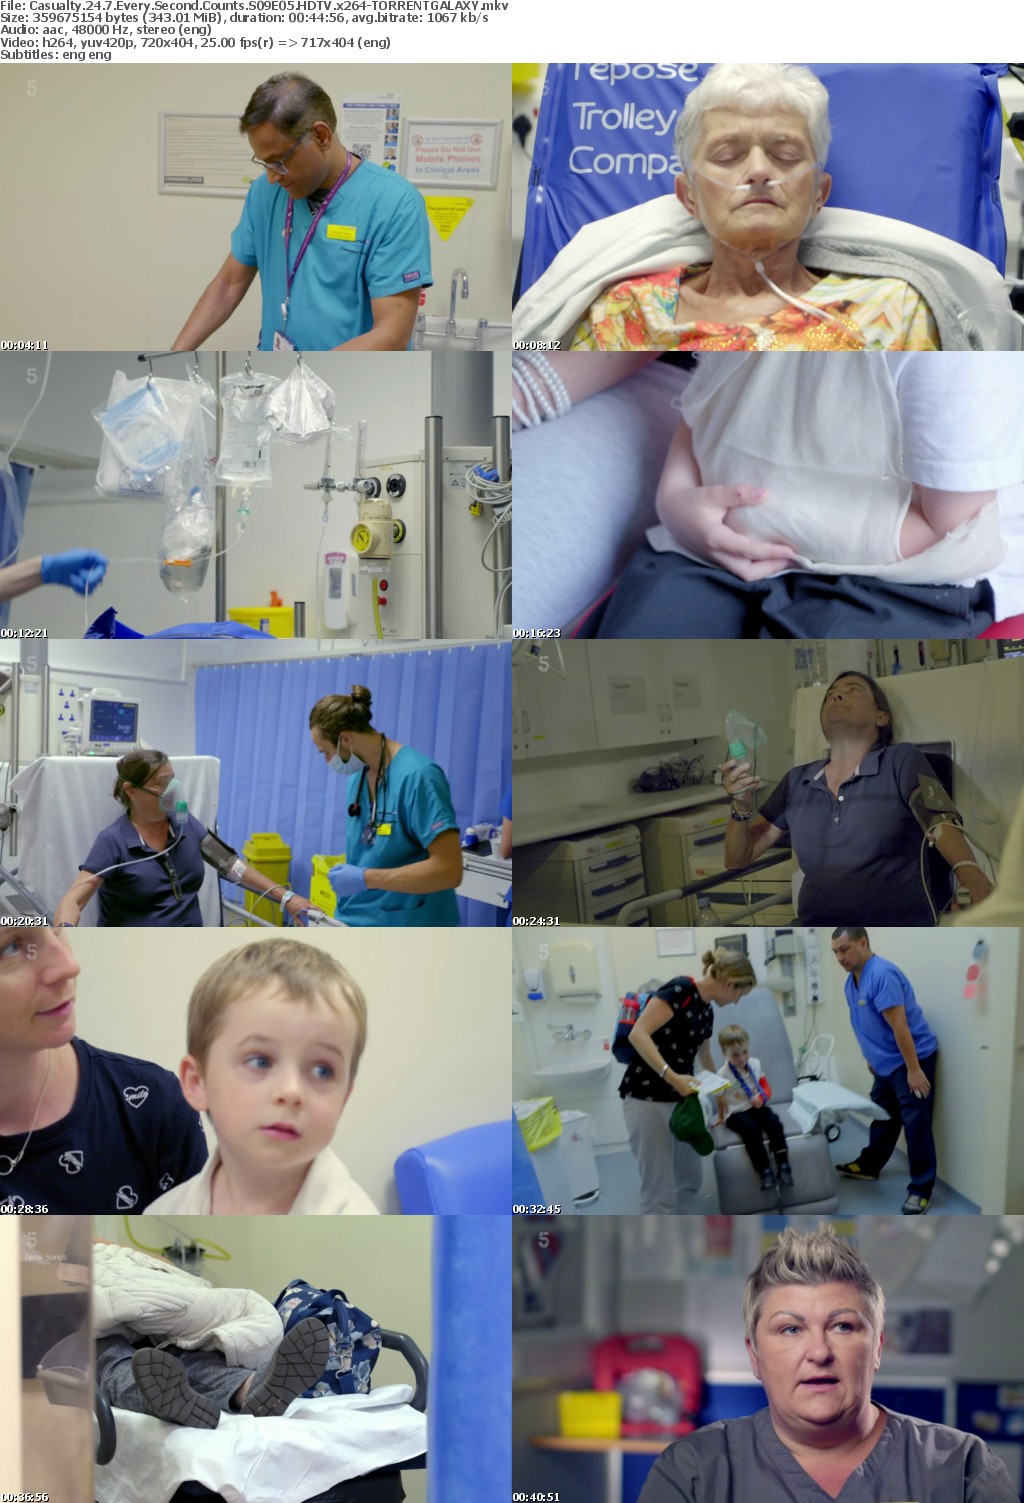 Casualty 24 7 Every Second Counts S09E05 HDTV x264-GALAXY